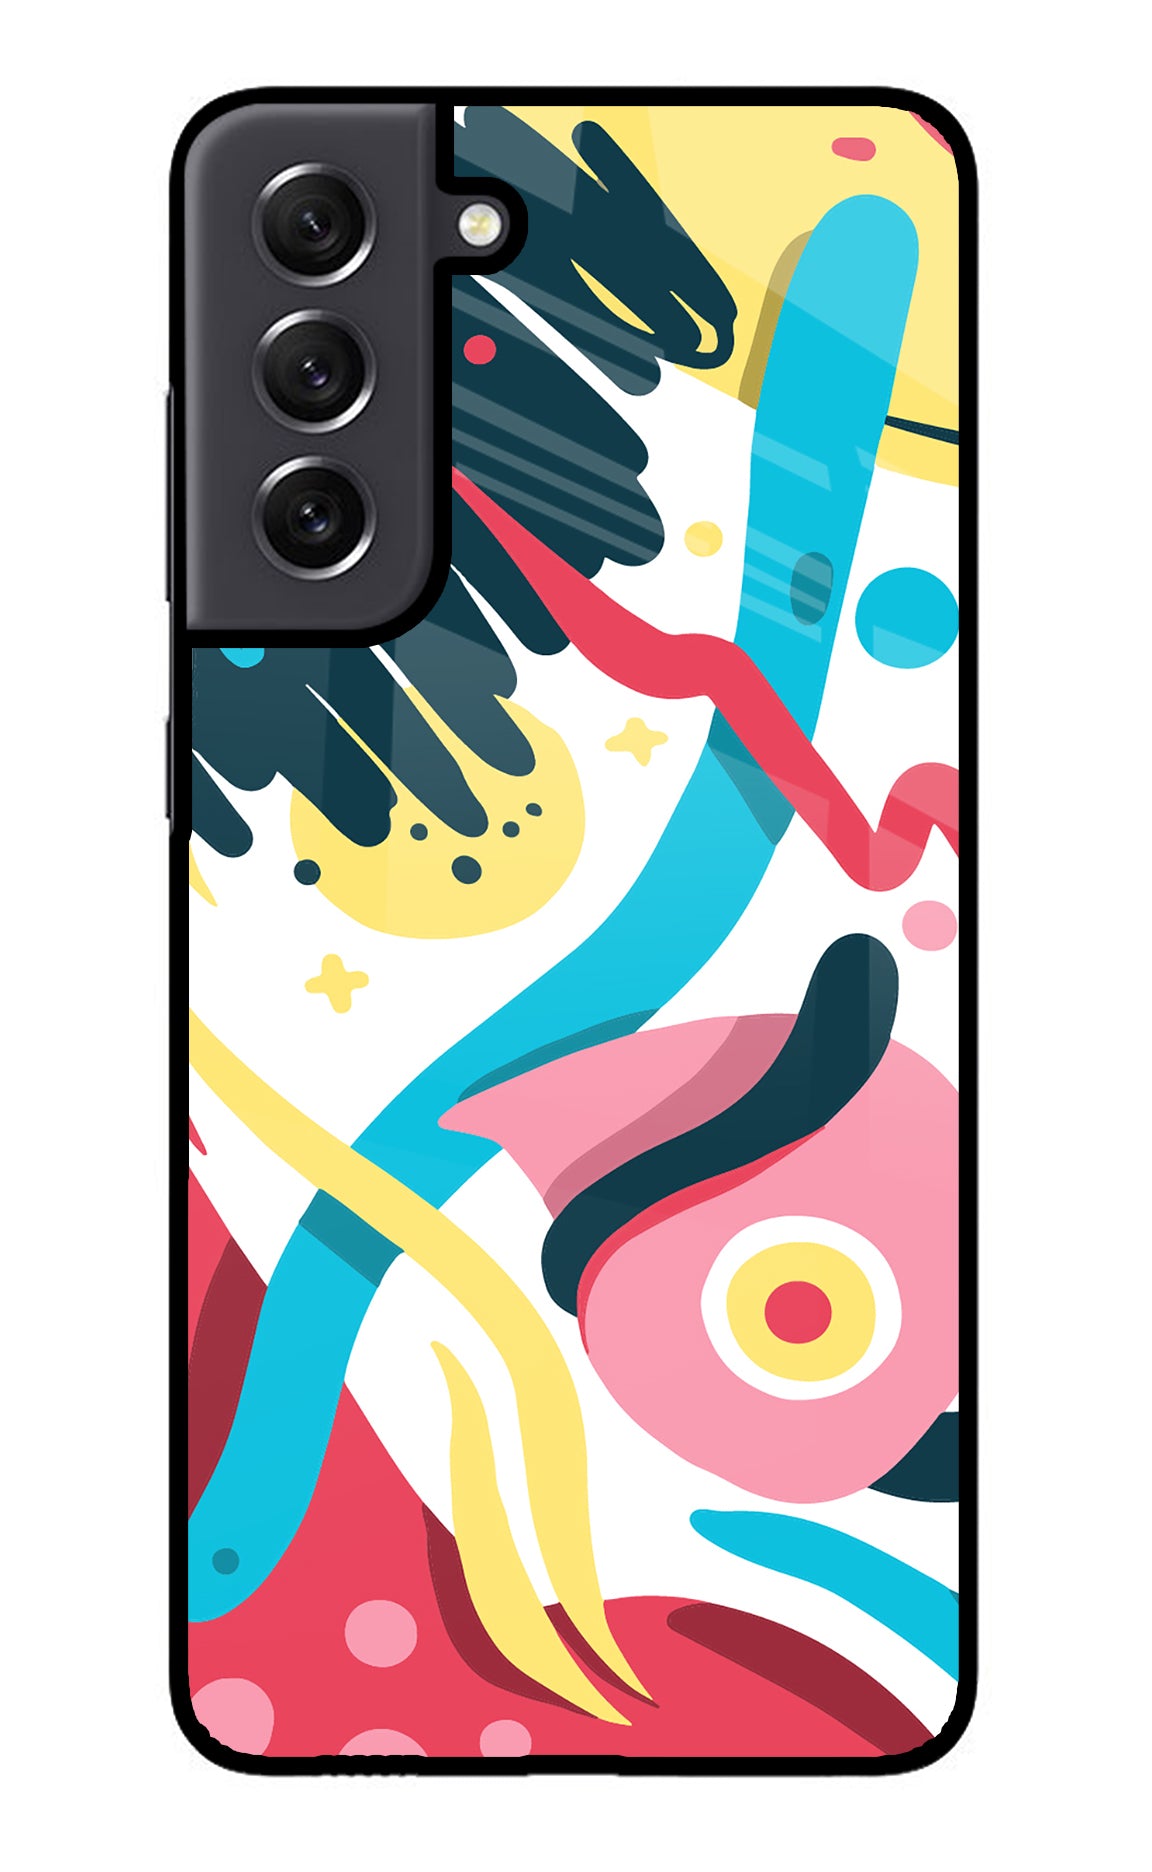 Trippy Samsung S21 FE 5G Back Cover